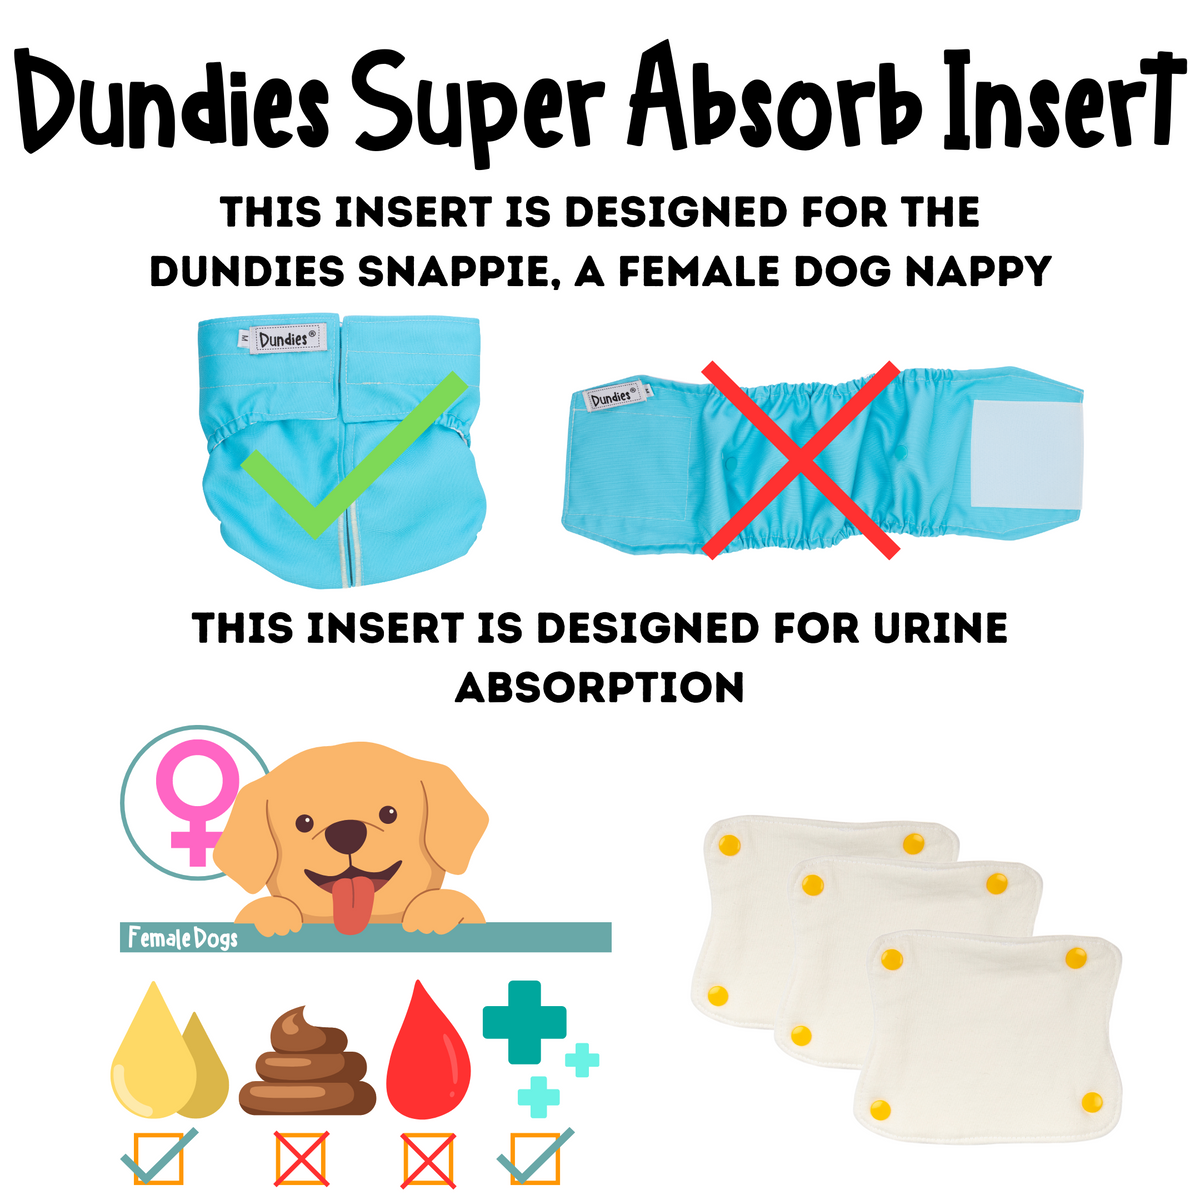 Dundies Snappies Super Bamboo Insert 5 pack (Light Incontinence)